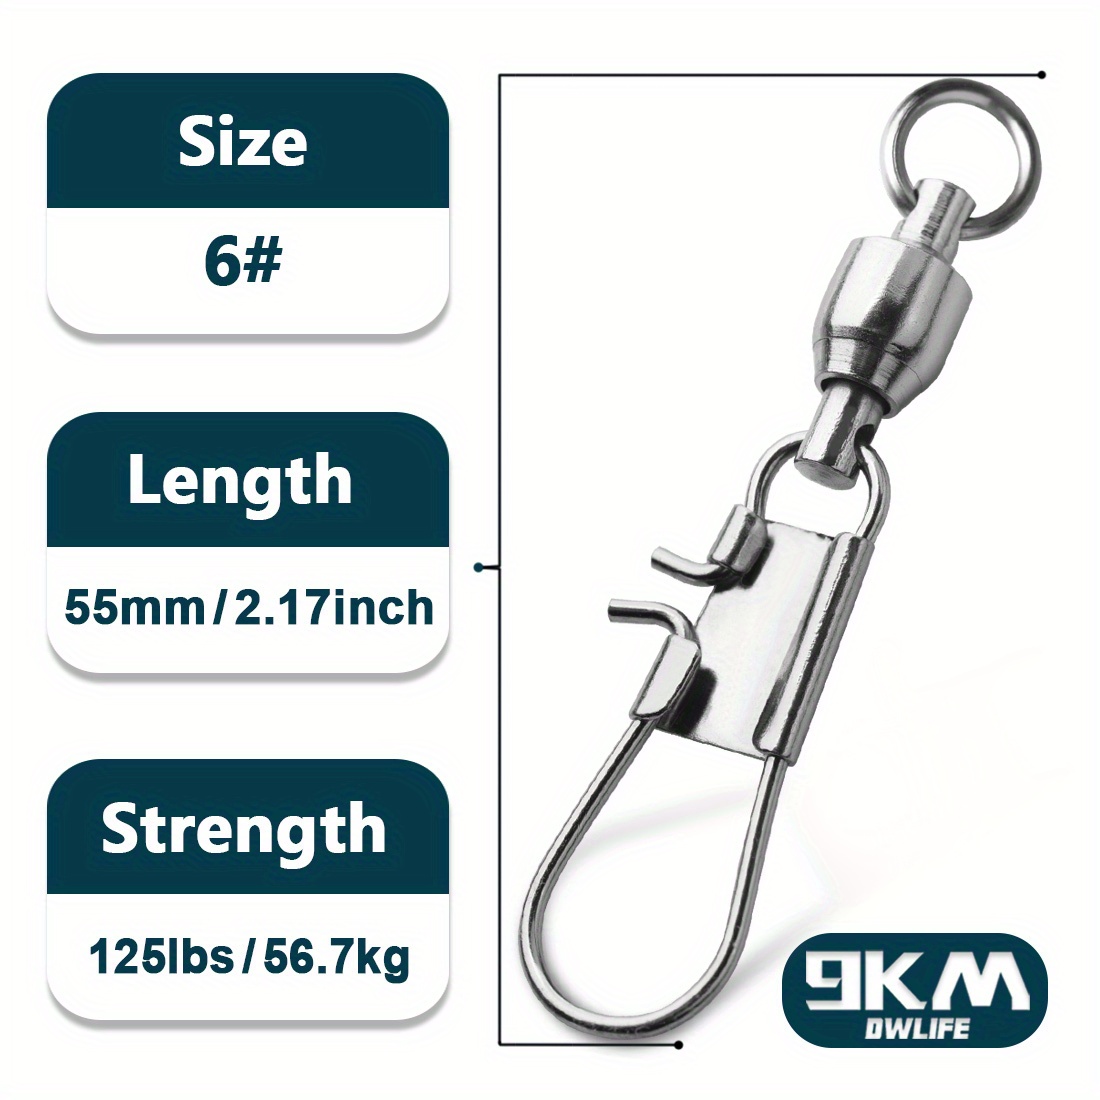 9km Fishing Swivels Snap Hooked Snap Stainless Steel Fishing